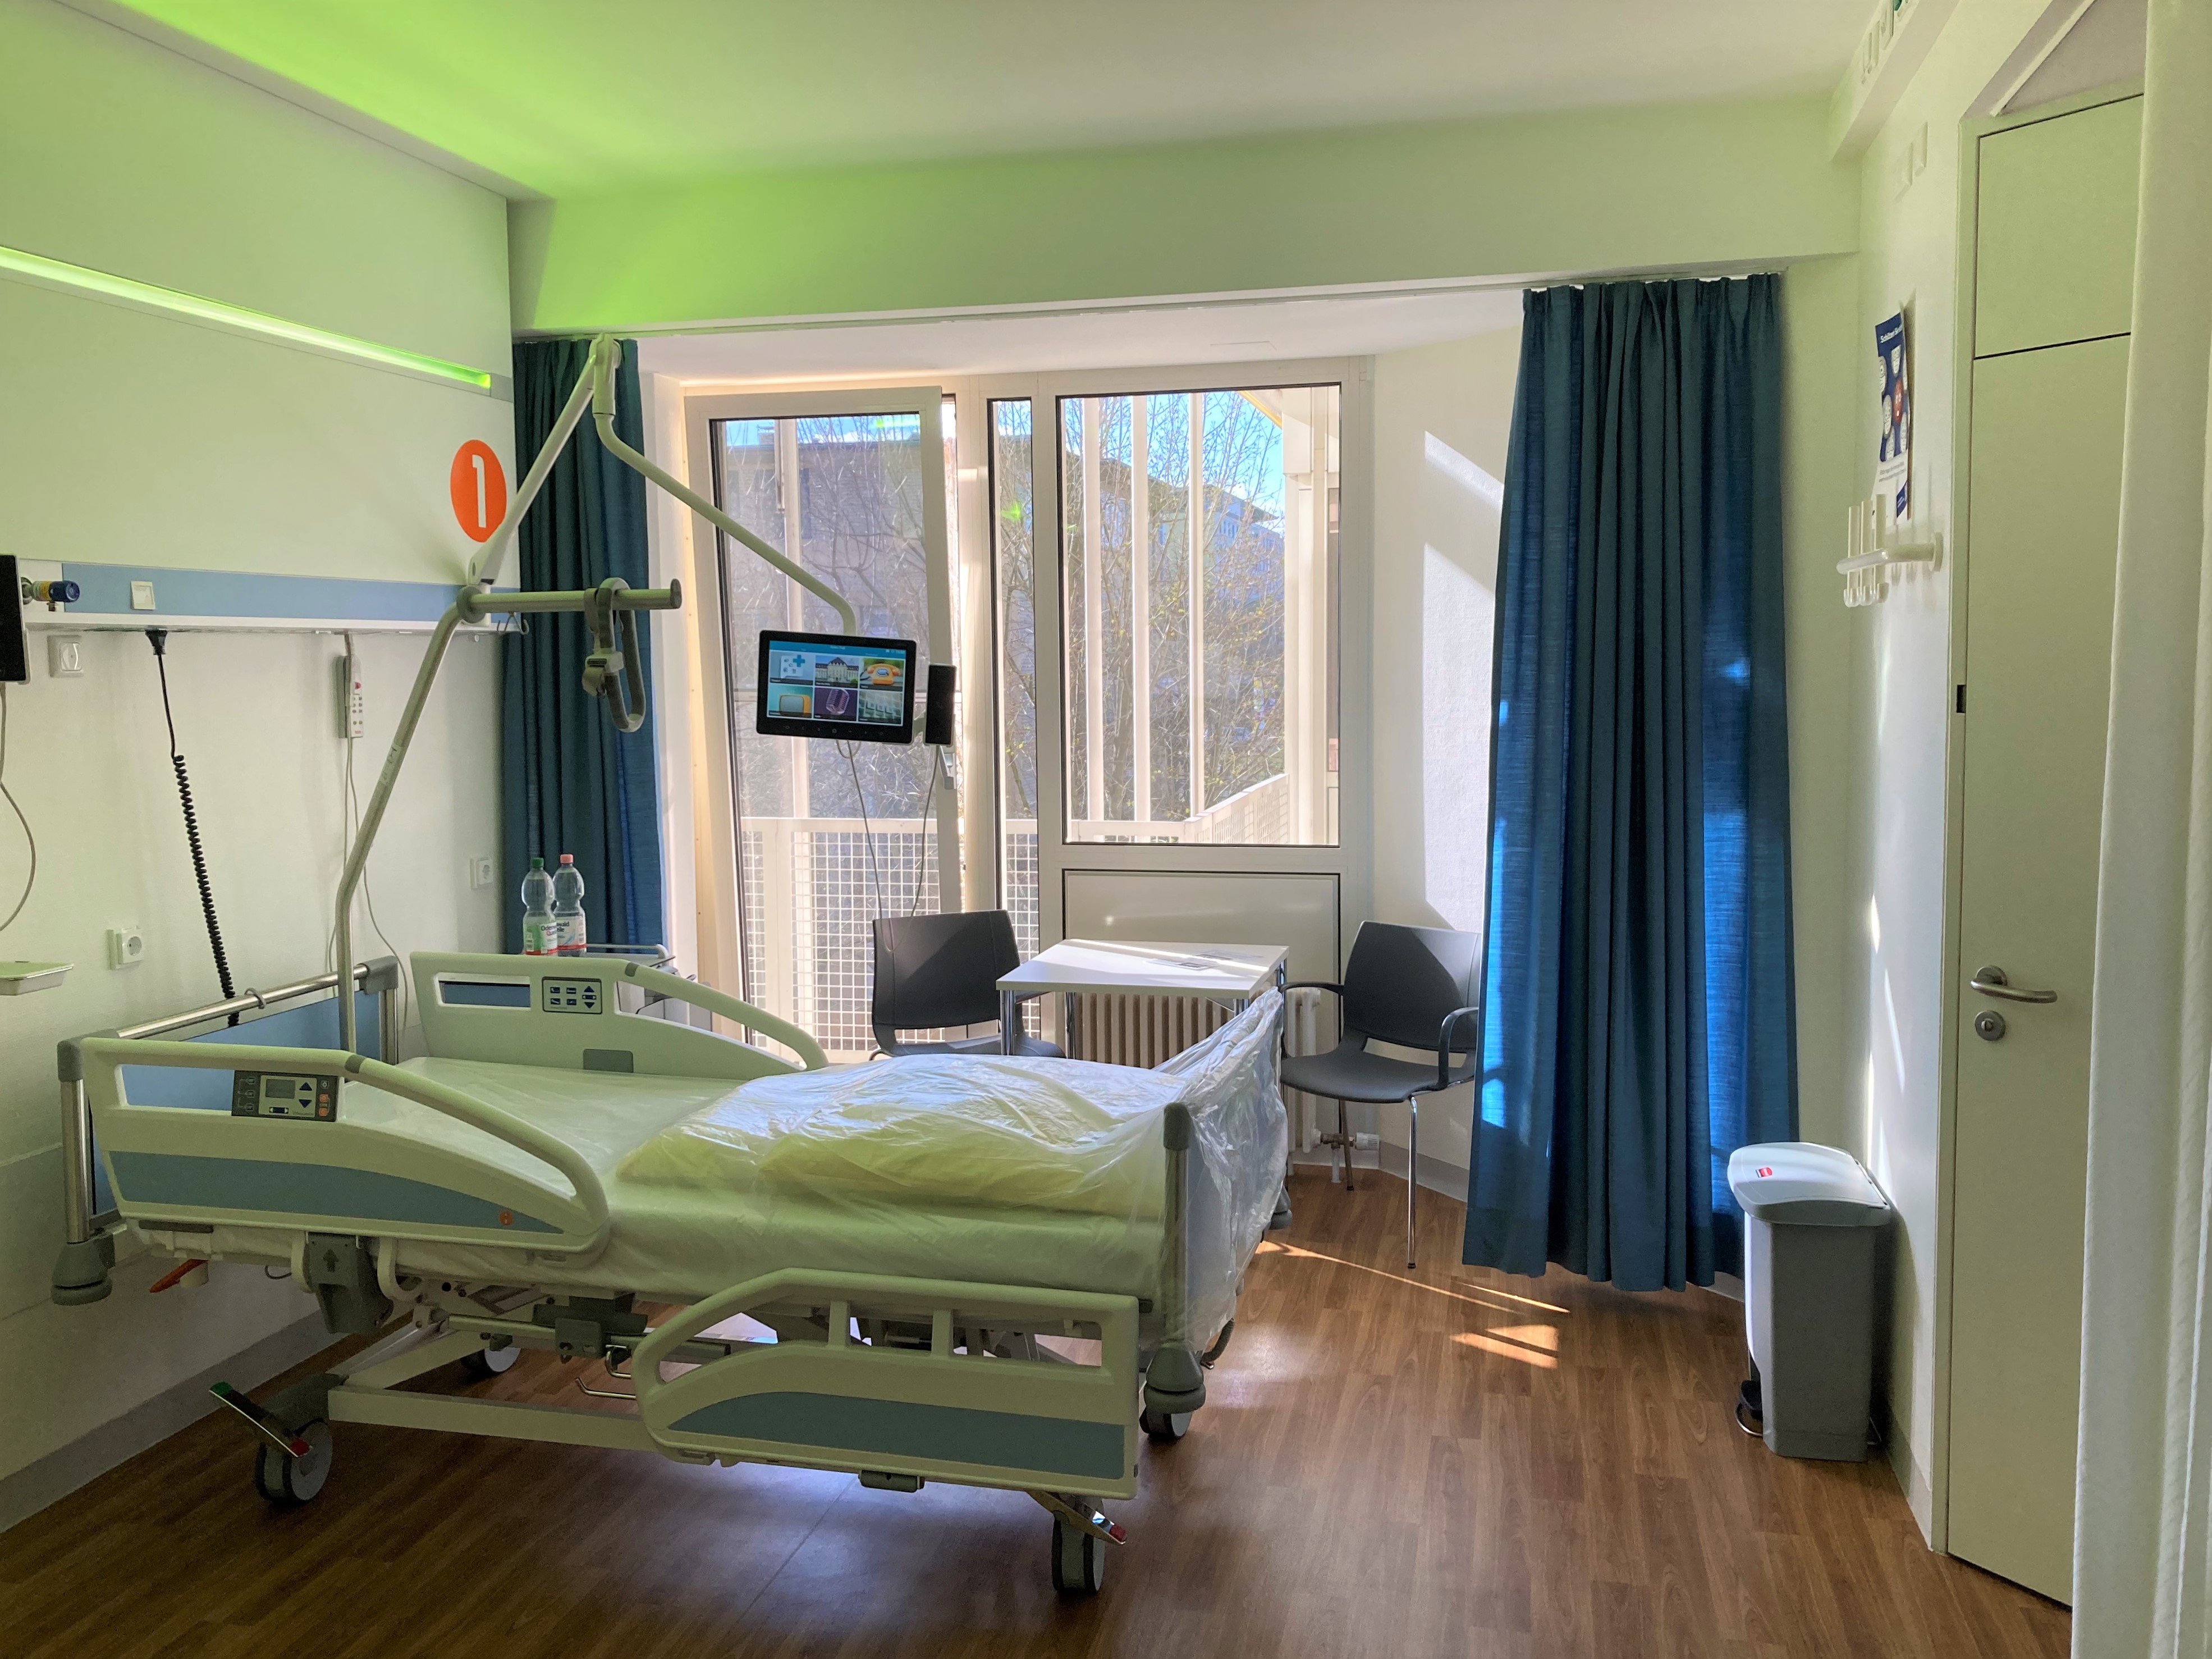 The photo shows a modern hospital room with a nursing bed.